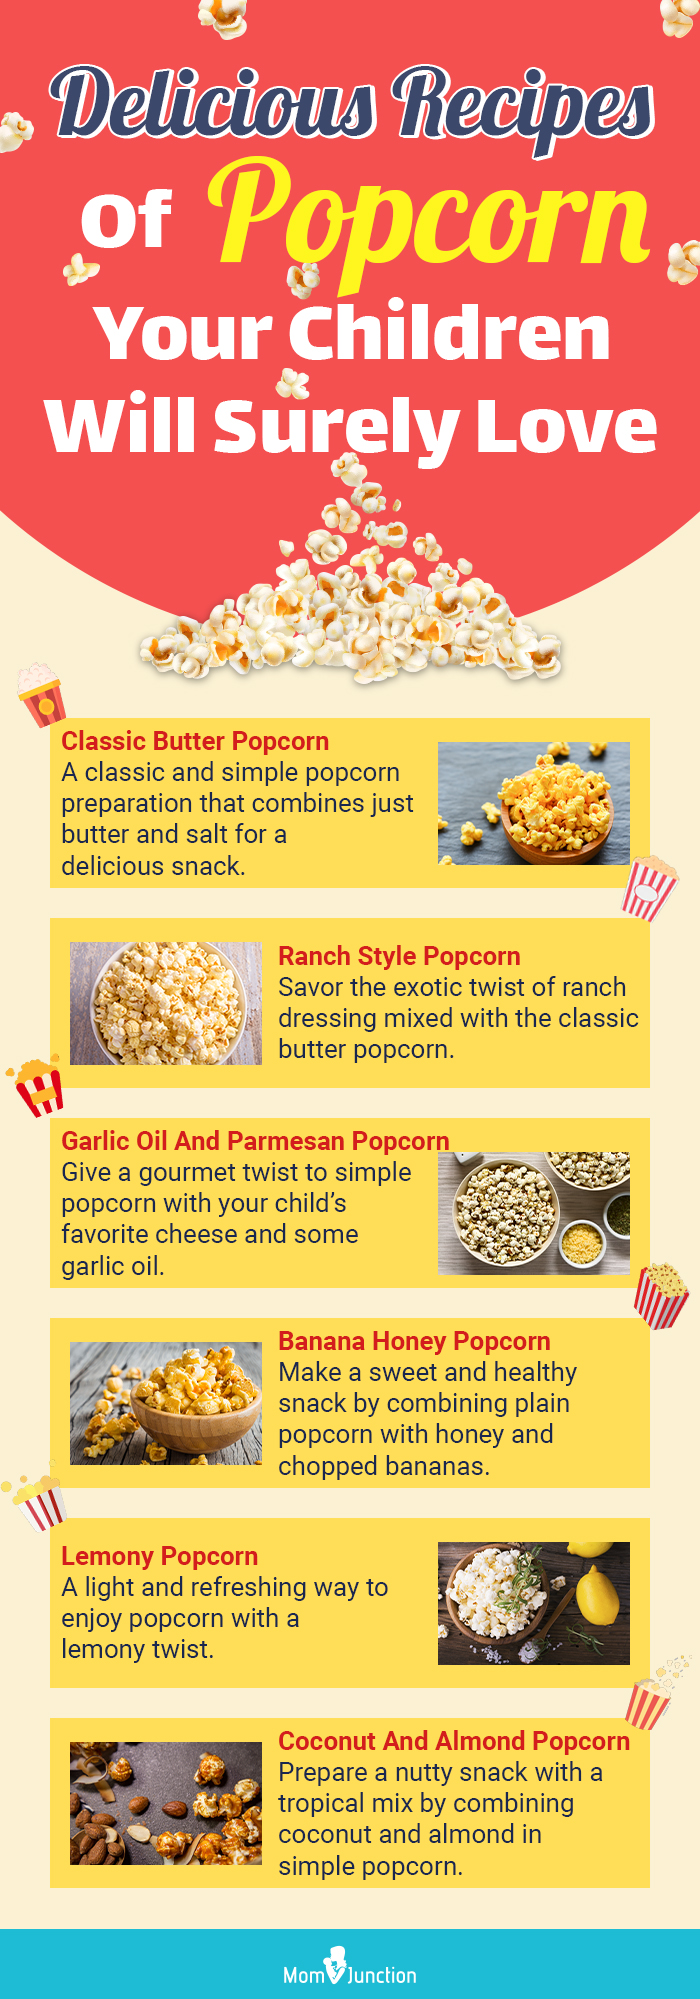 delicious recipes of popcorn your children will surely love (infographic)